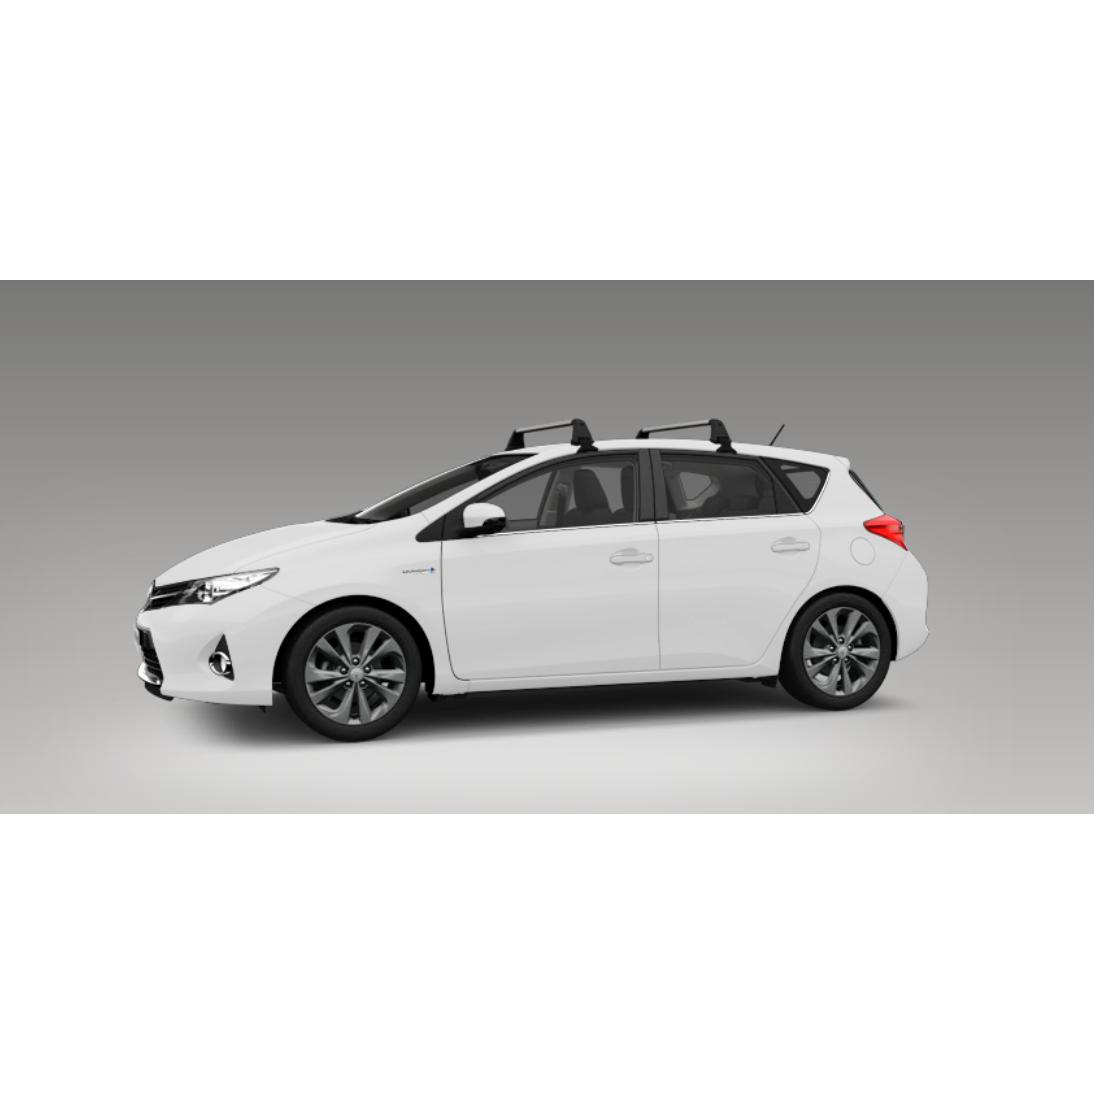 Used Toyota Auris 2012-2018 review